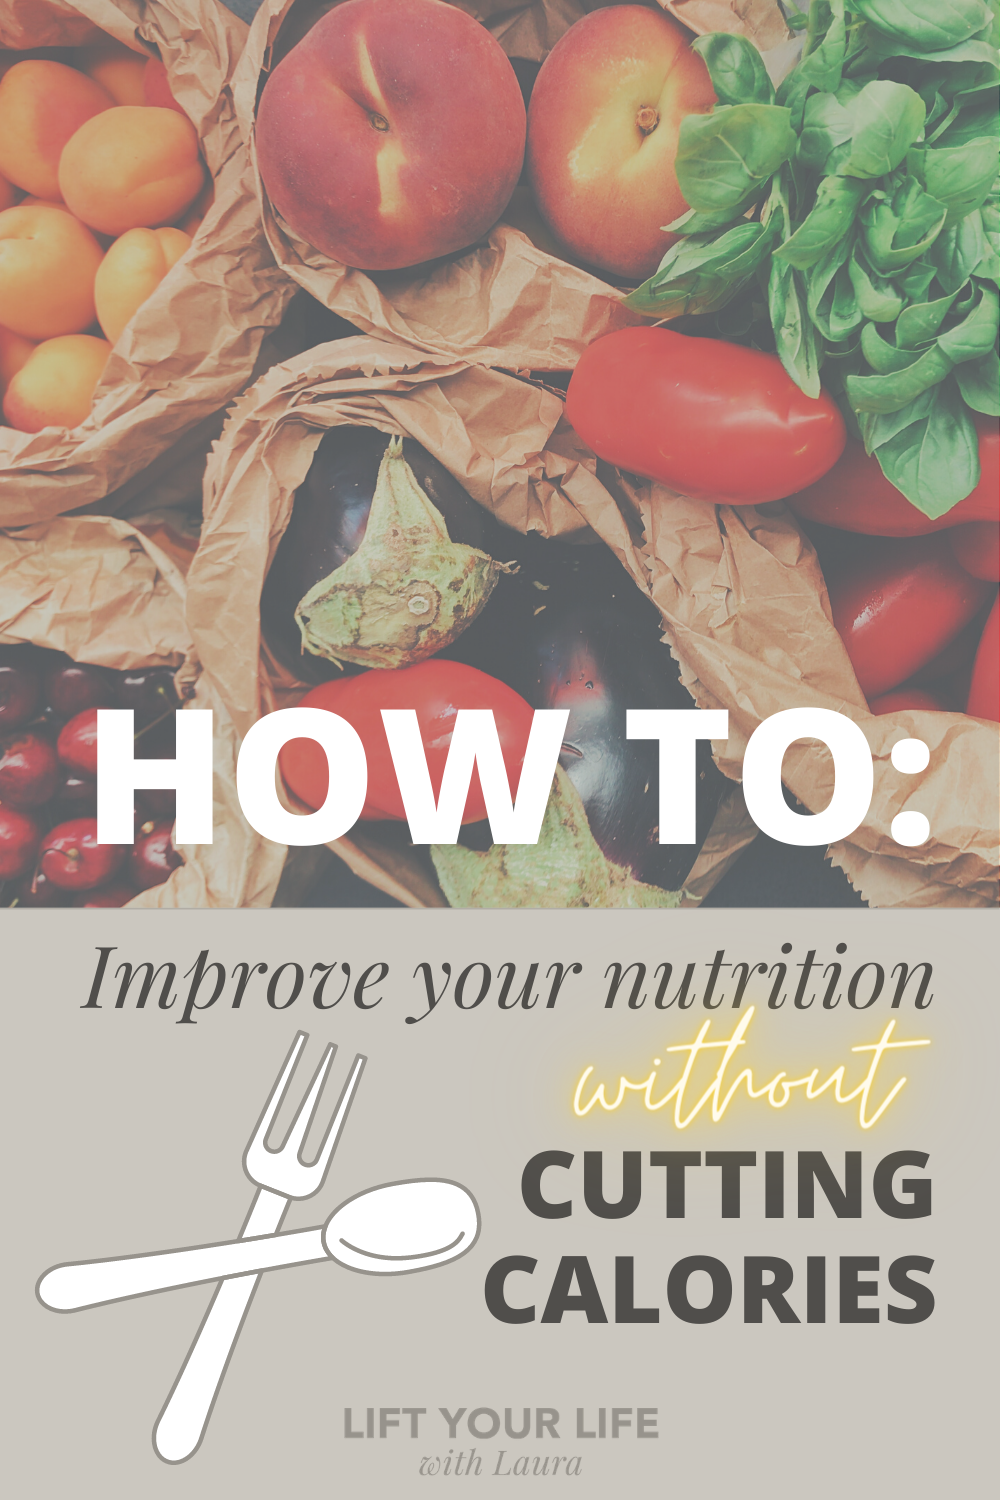 Learn how to eat healthy without counting calories, how to eat healthy, save money on healthy food, save money on healthy groceries, how to eat more vegetables, how to eat healthy, how to eat clean on a budget, how to improve nutrition.